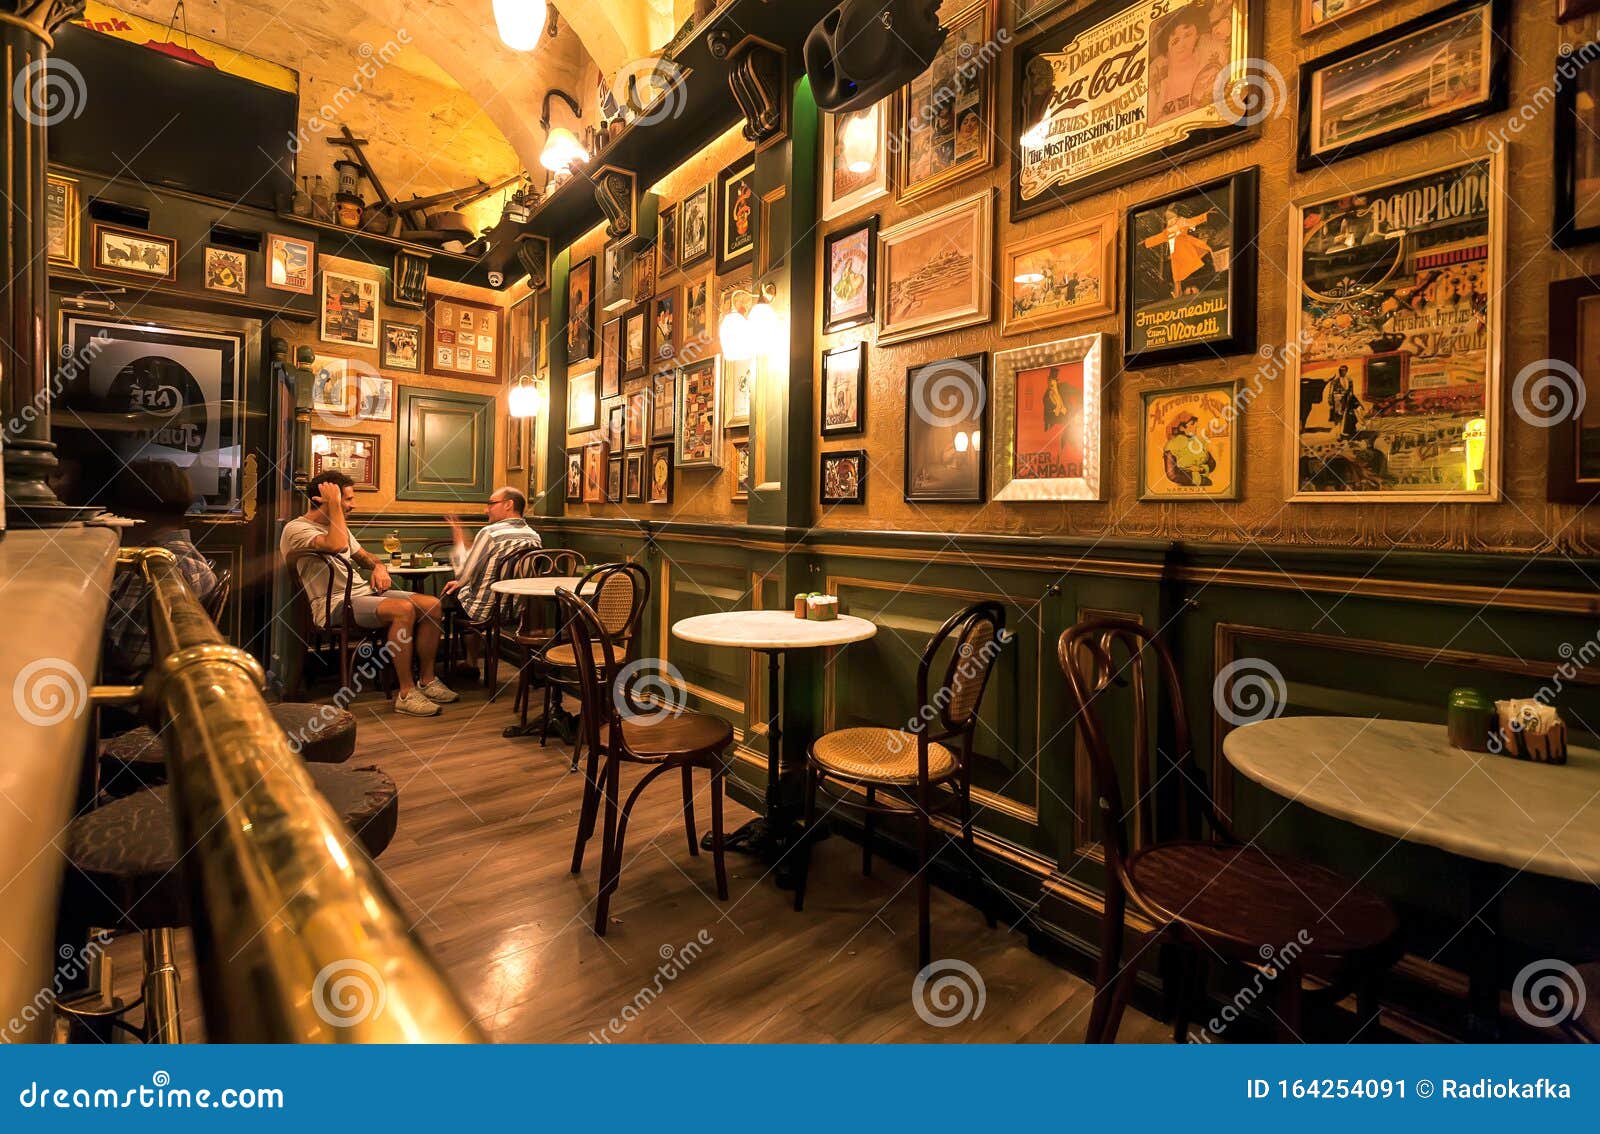 50,887 Vintage Restaurant Interior Stock Photos - Free & Royalty-Free Stock  Photos from Dreamstime